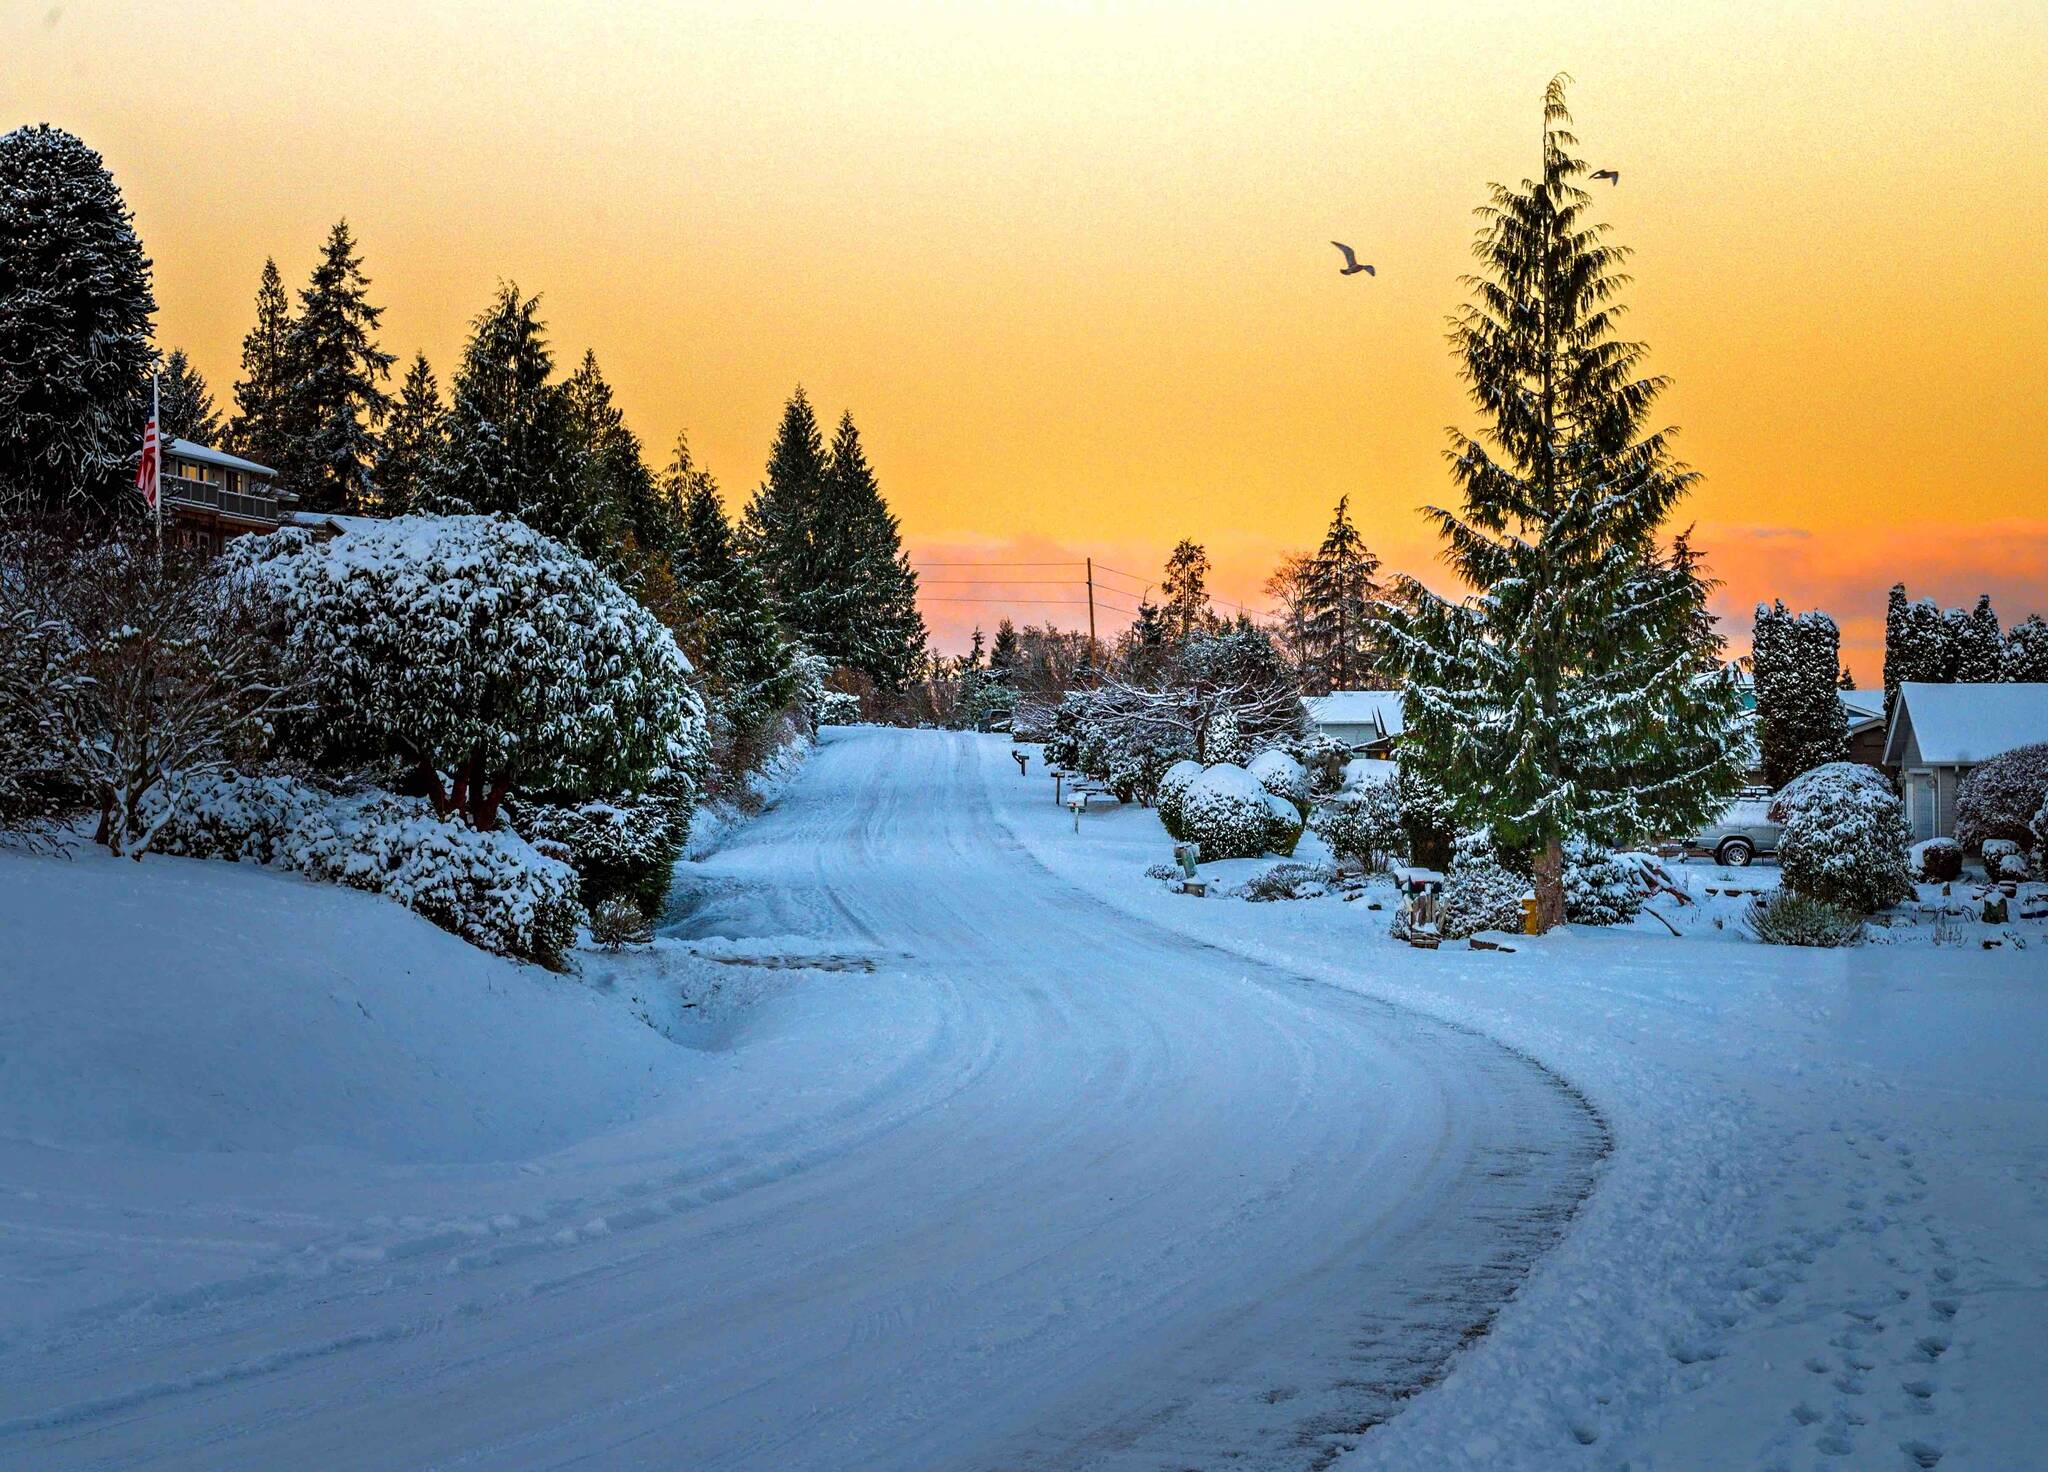 Photo by Pam Headridge
<em>Snow covers a North Whidbey road at sunrise.</em>